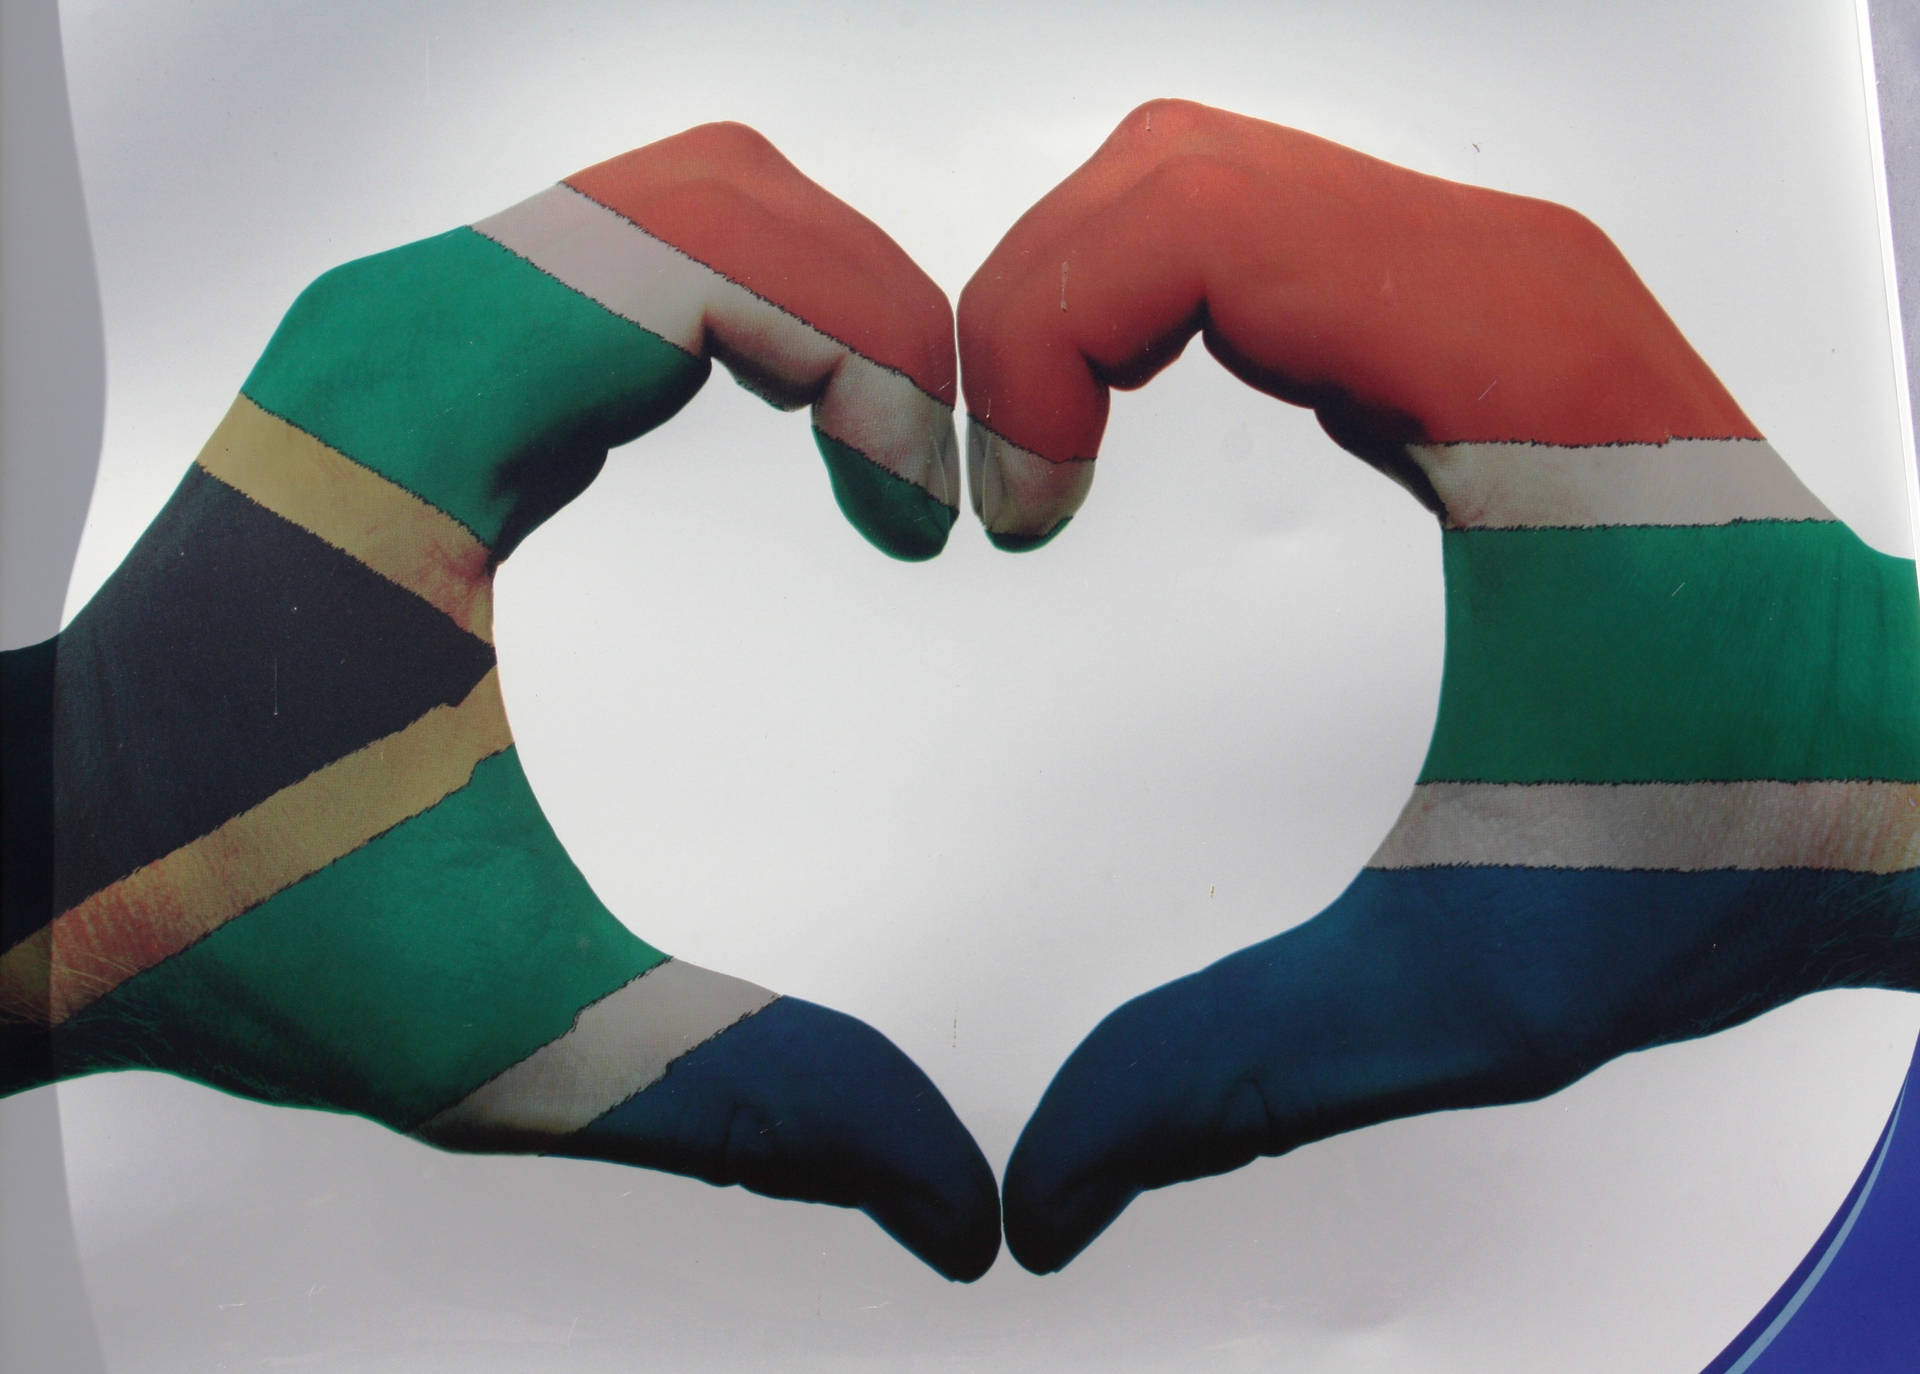 Expressing Love Through Hand Heart Shape Against South African Landscape